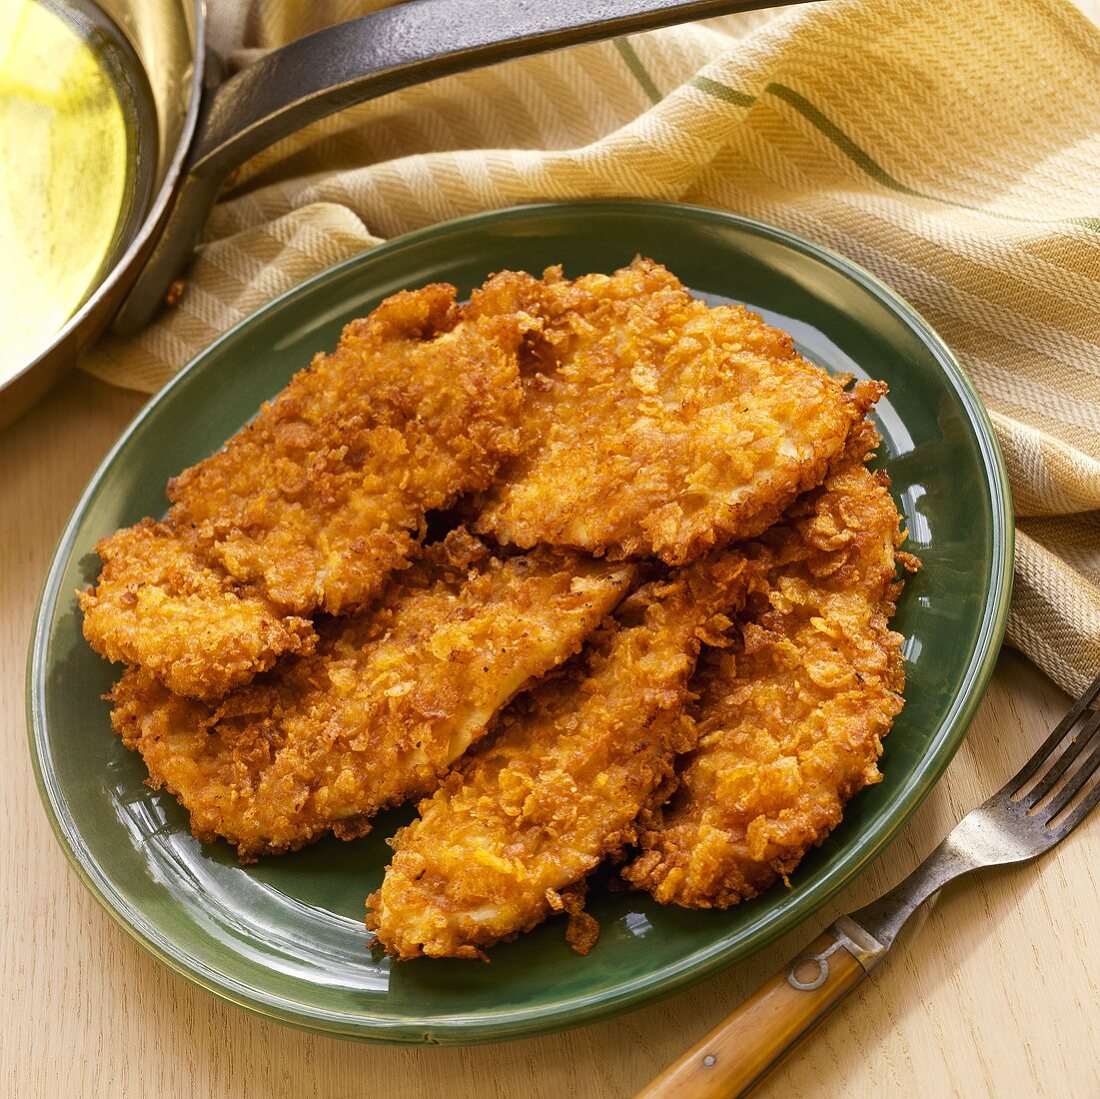 Cornflake Coated Thin Cut Chicken Breasts